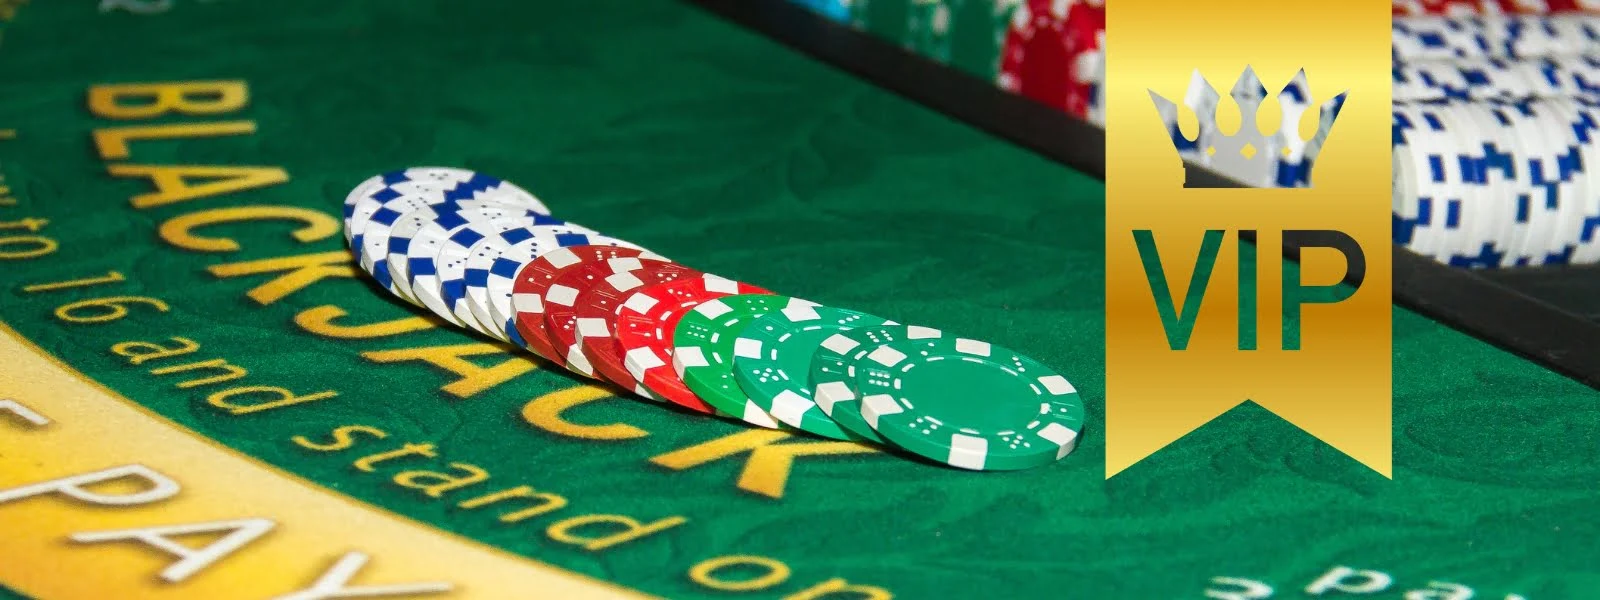 We are happy to present you a selection of top-notch VIP Blackjack live casinos where you can get an excellent gaming experience